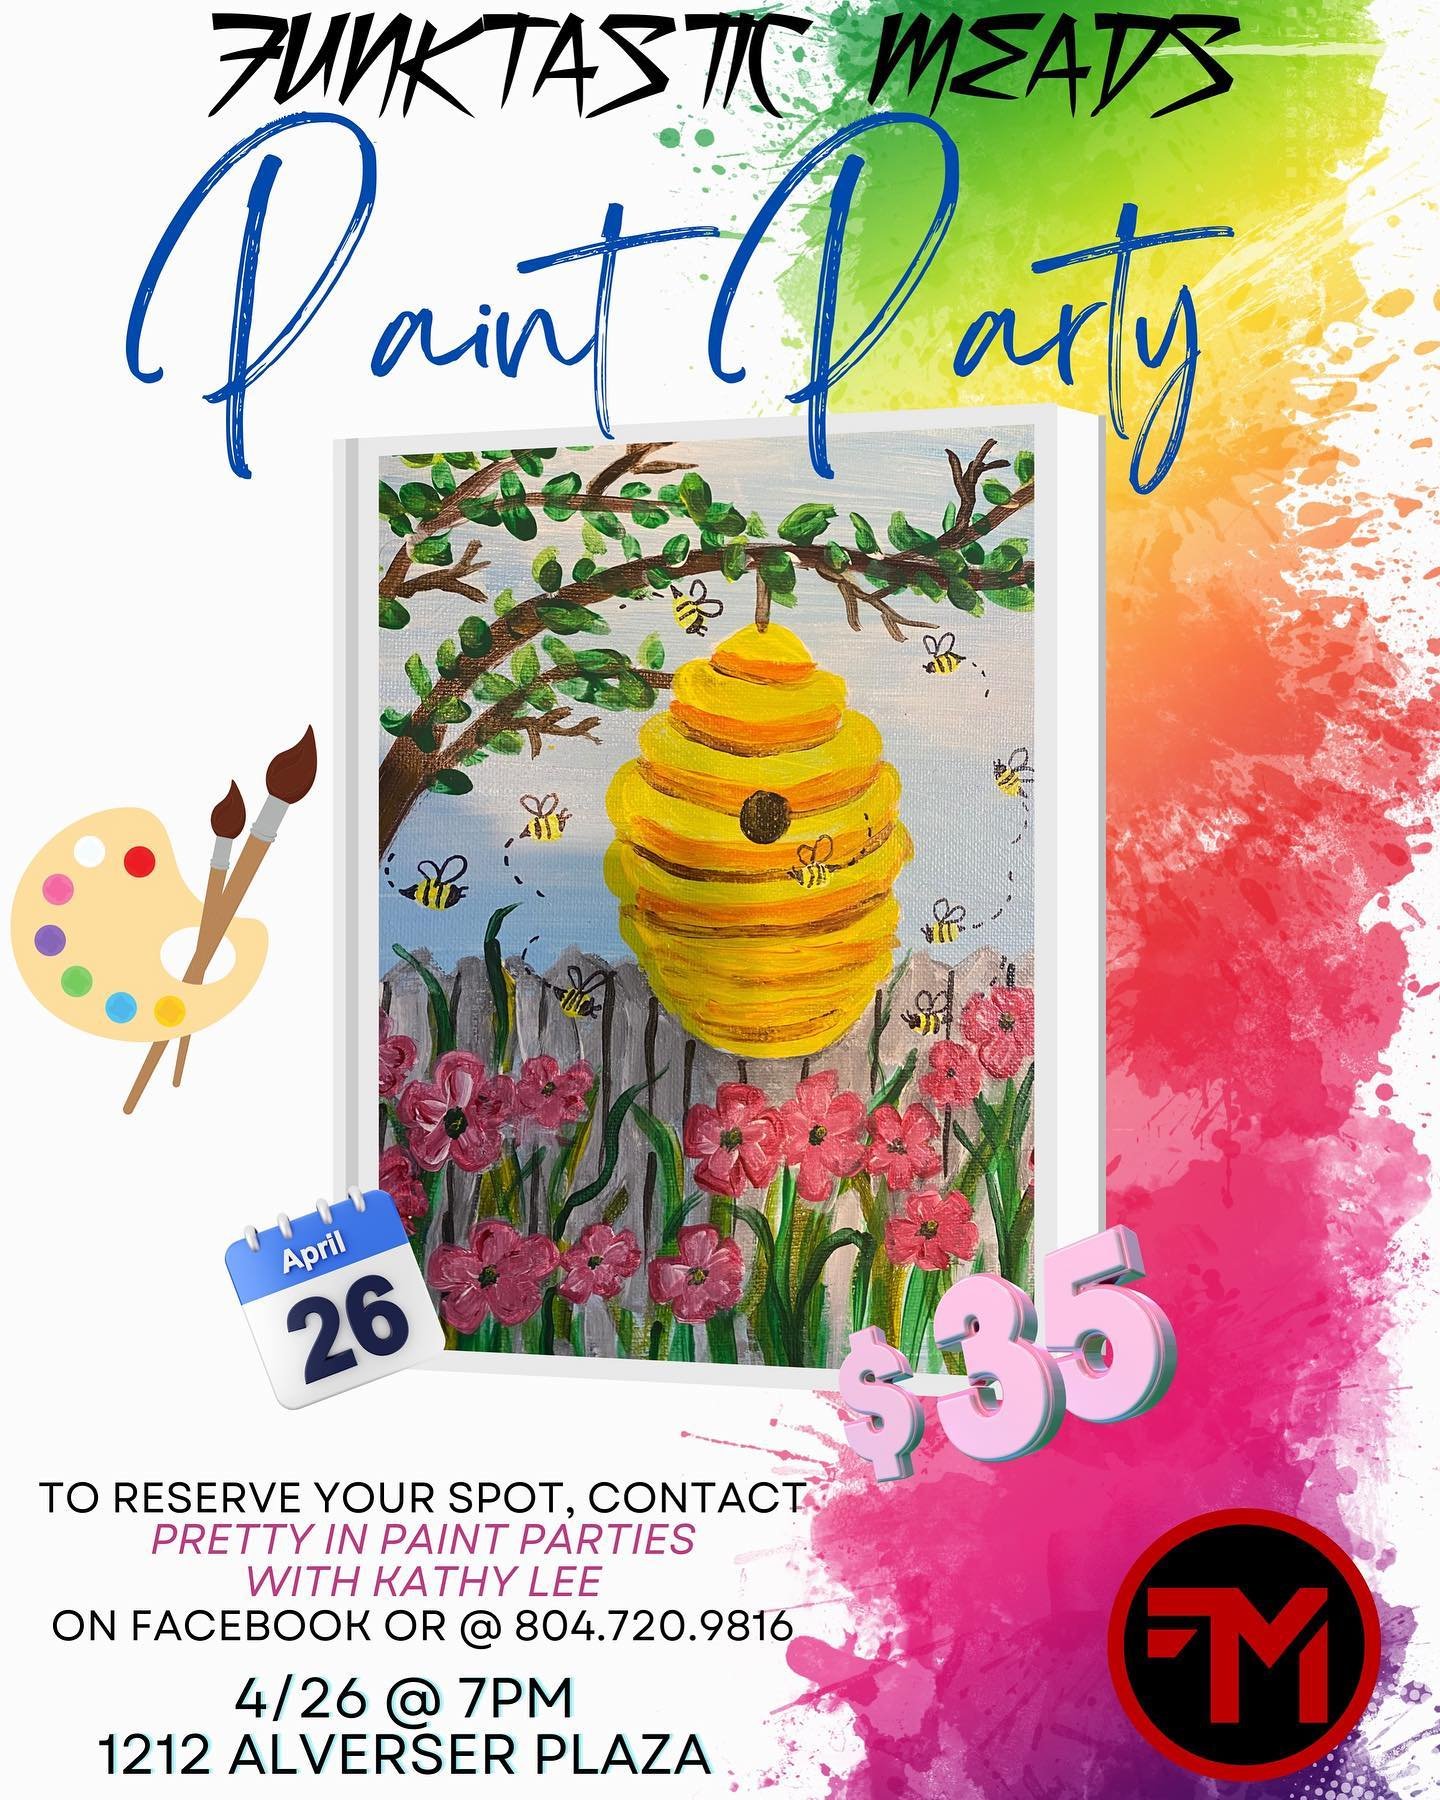 🎨 Less than 1 week until we host Pretty in Paint Parties with Kathy Lee 🙌🙌🙌 AND it&rsquo;s only 35 💵 

‼️Please contact her on FB or using the phone number on the flyer ASAP to reserve your spot!  Room is limited so get on it Funktastic Fam‼️

#